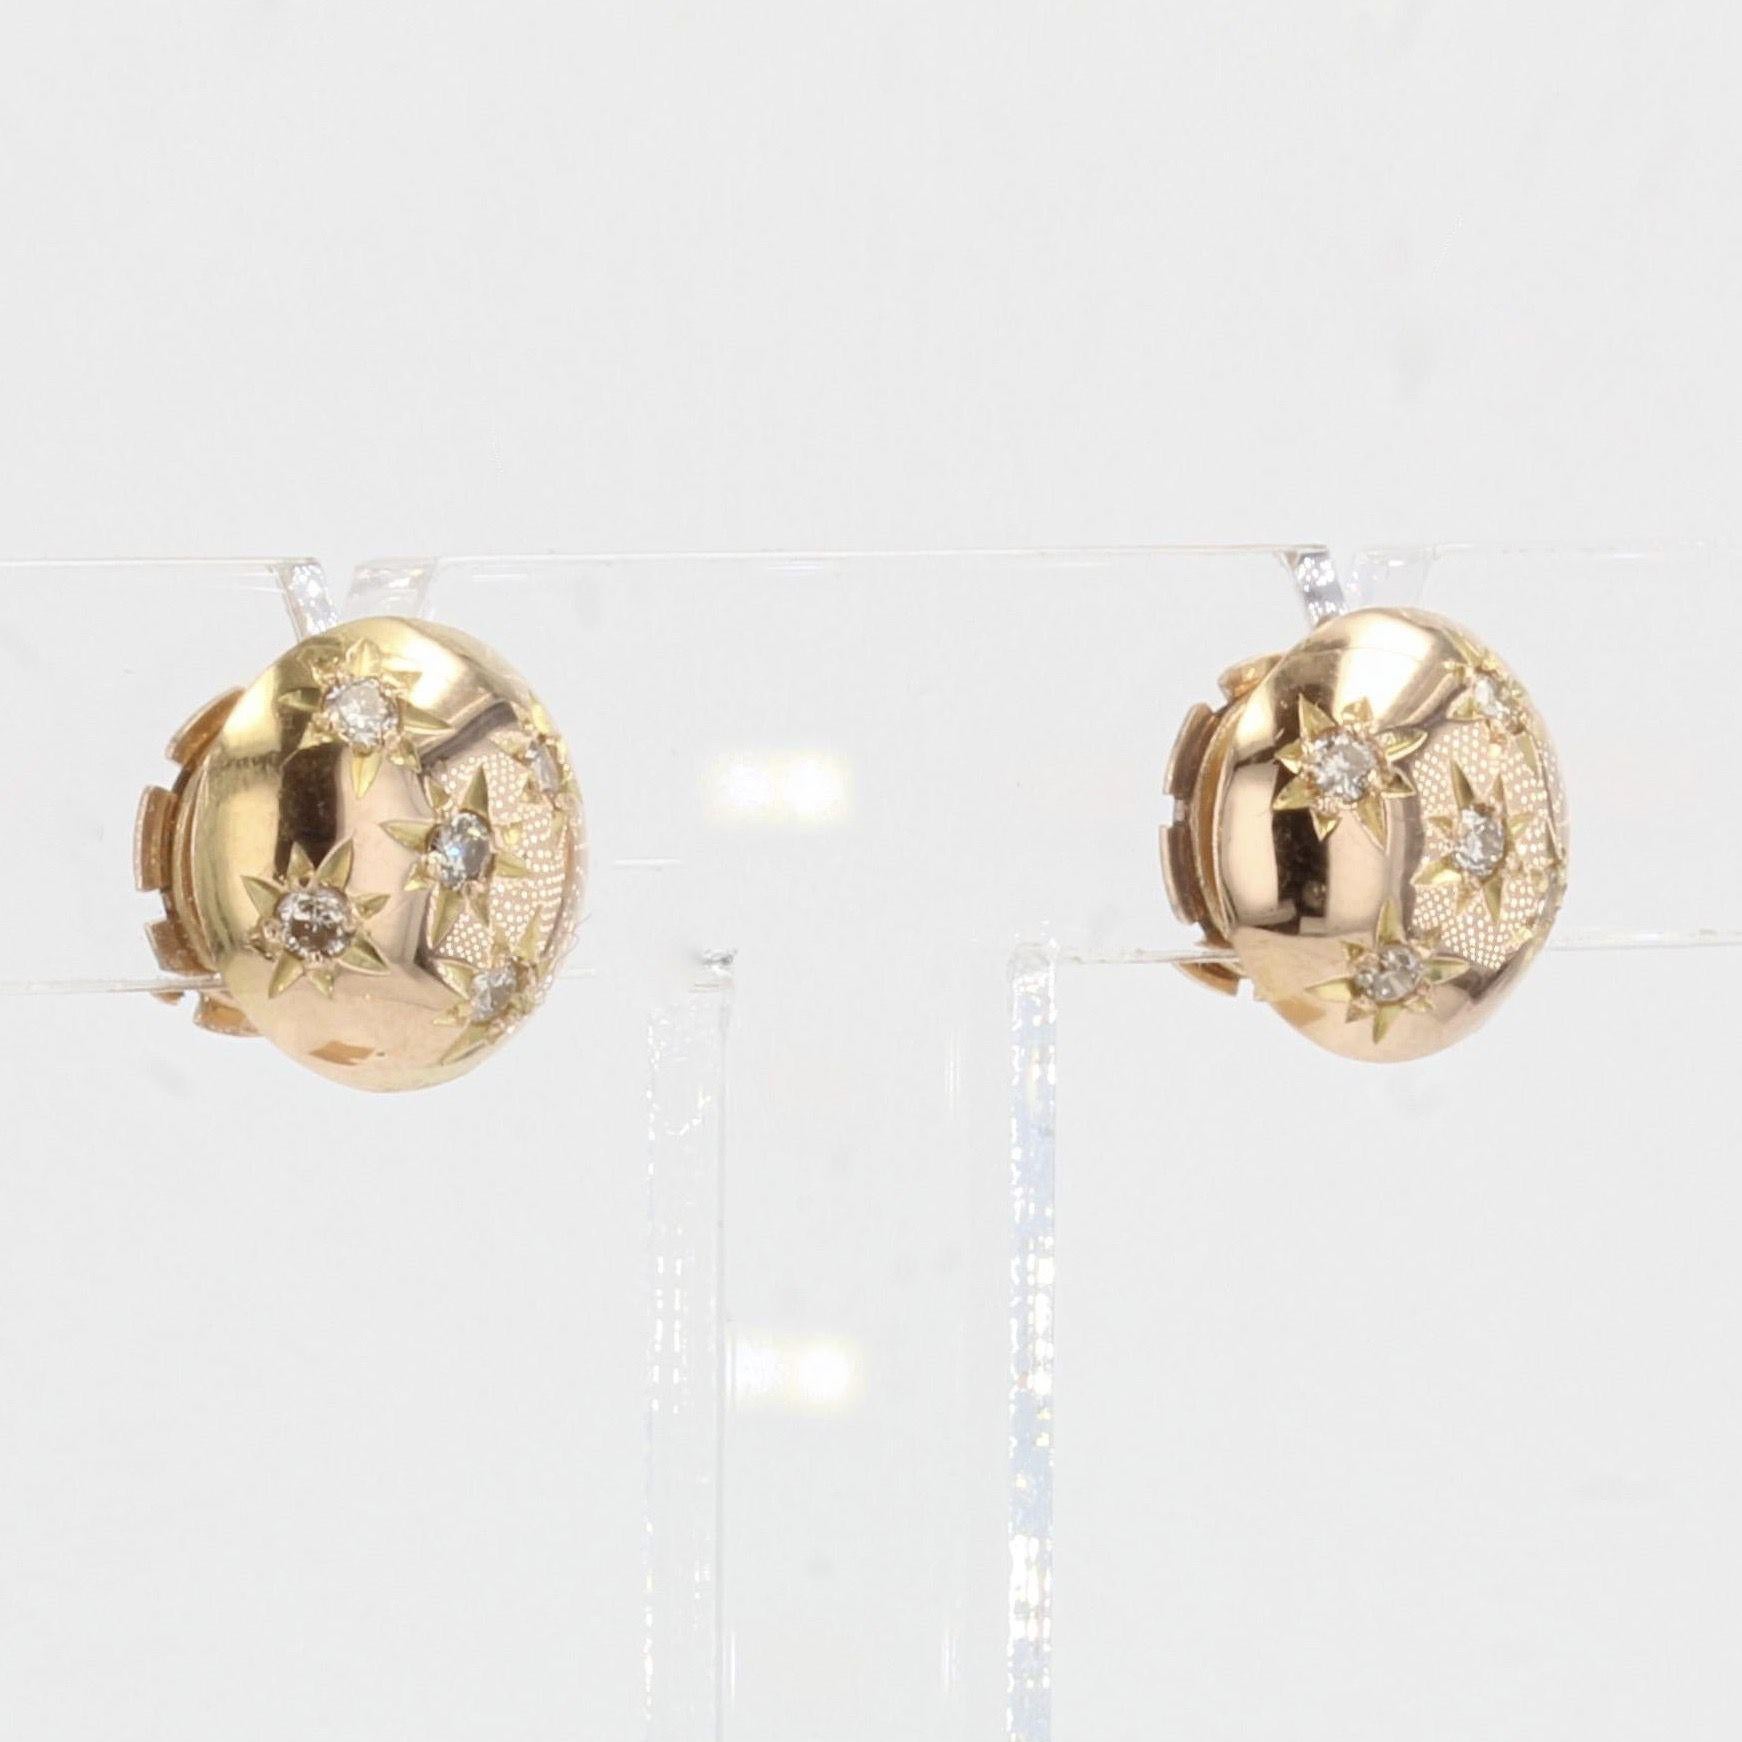 Brilliant Cut French 1950s Diamonds 18 Karat Yellow Gold Dome Earrings For Sale